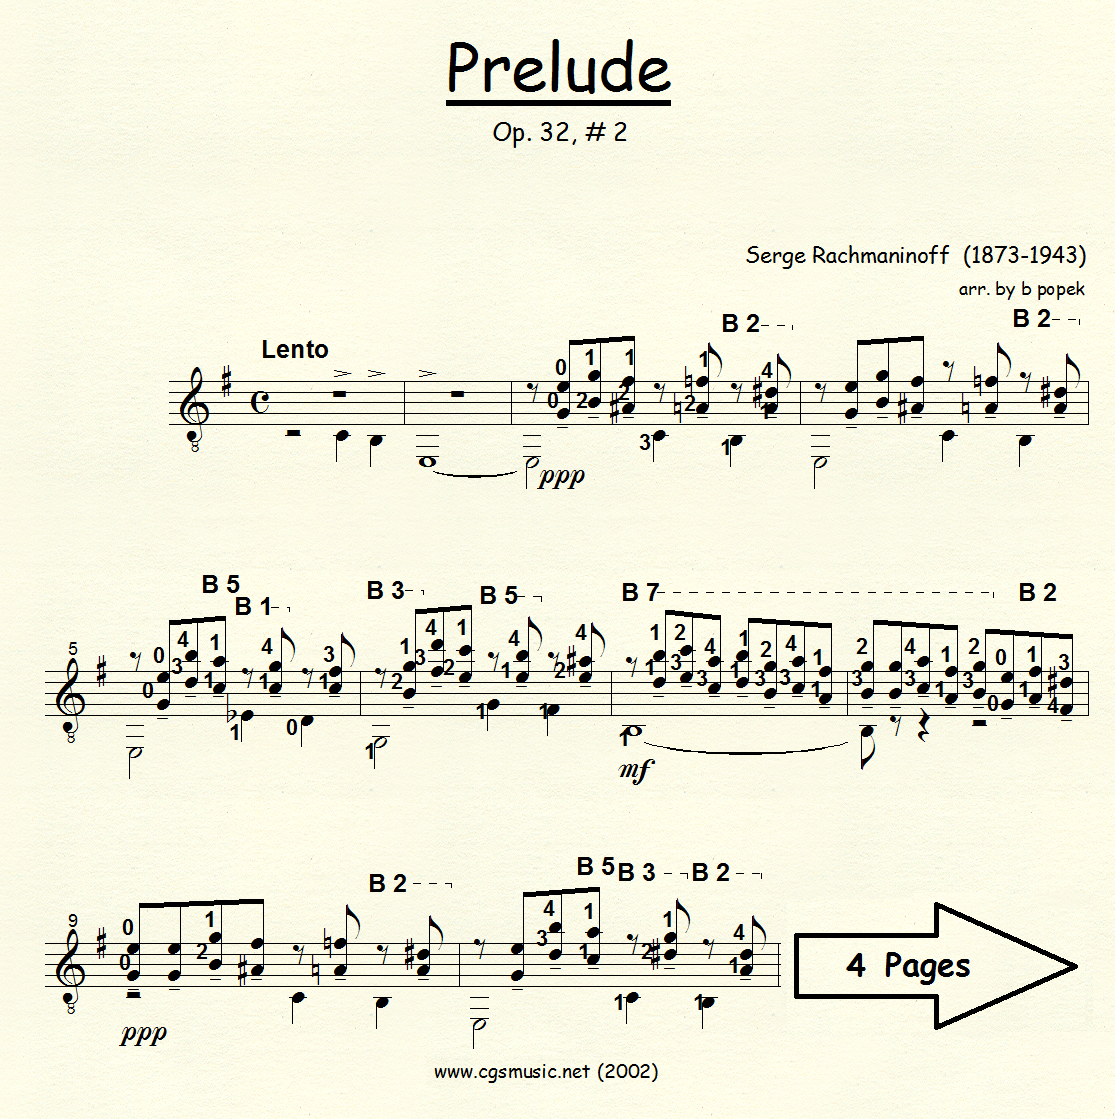 Prelude Op 32 #2 (Rachmaninoff) for Classical Guitar in Standard Notation